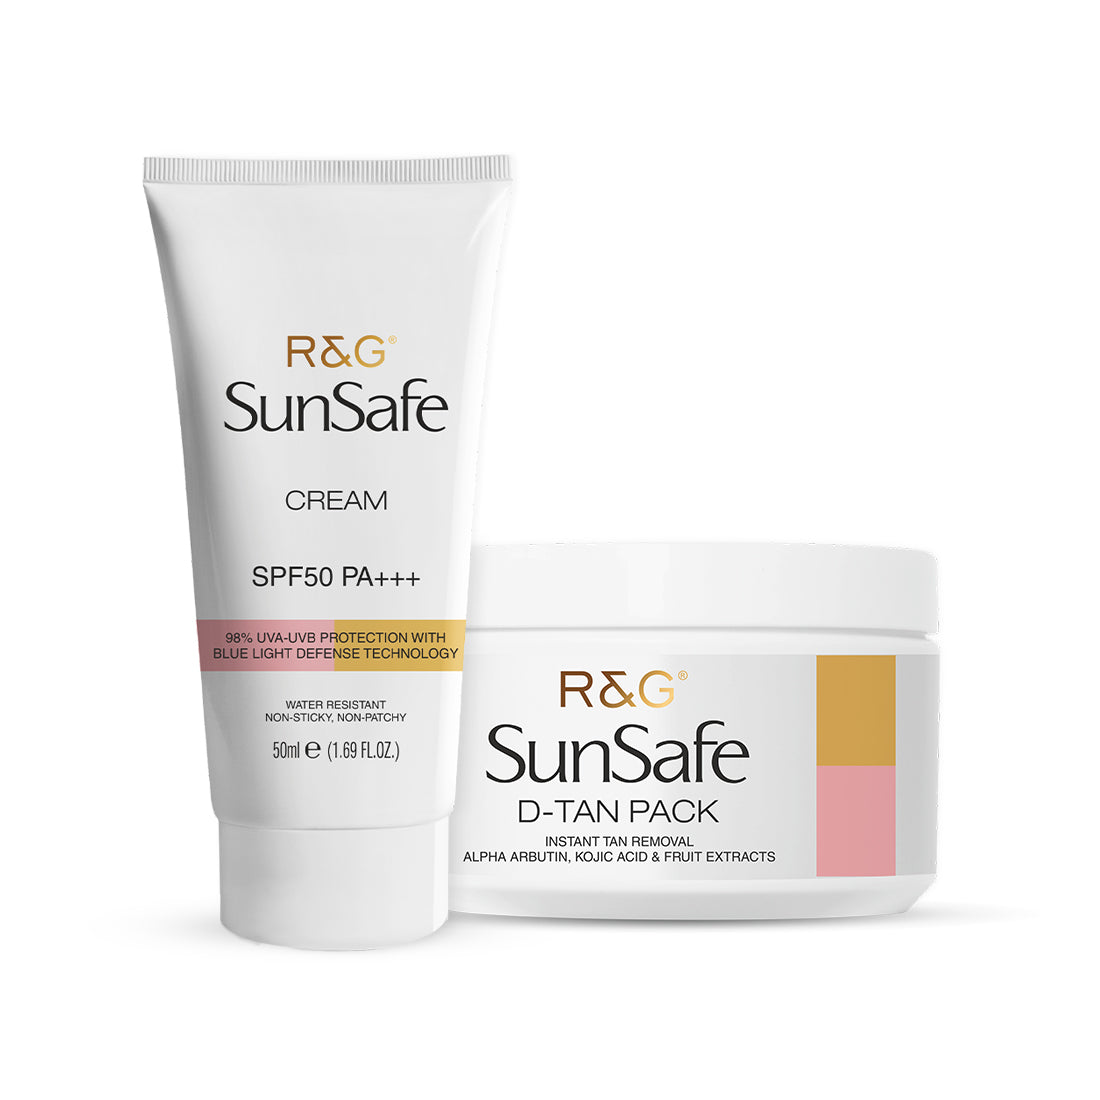 R&G SunSafe SPF 50 Sunscreen & D-Tan Pack Combo | Broad Spectrum PA+++ with Tan Removal | Protection Against UVA-UVB Rays | Helps in Minimize Age spots